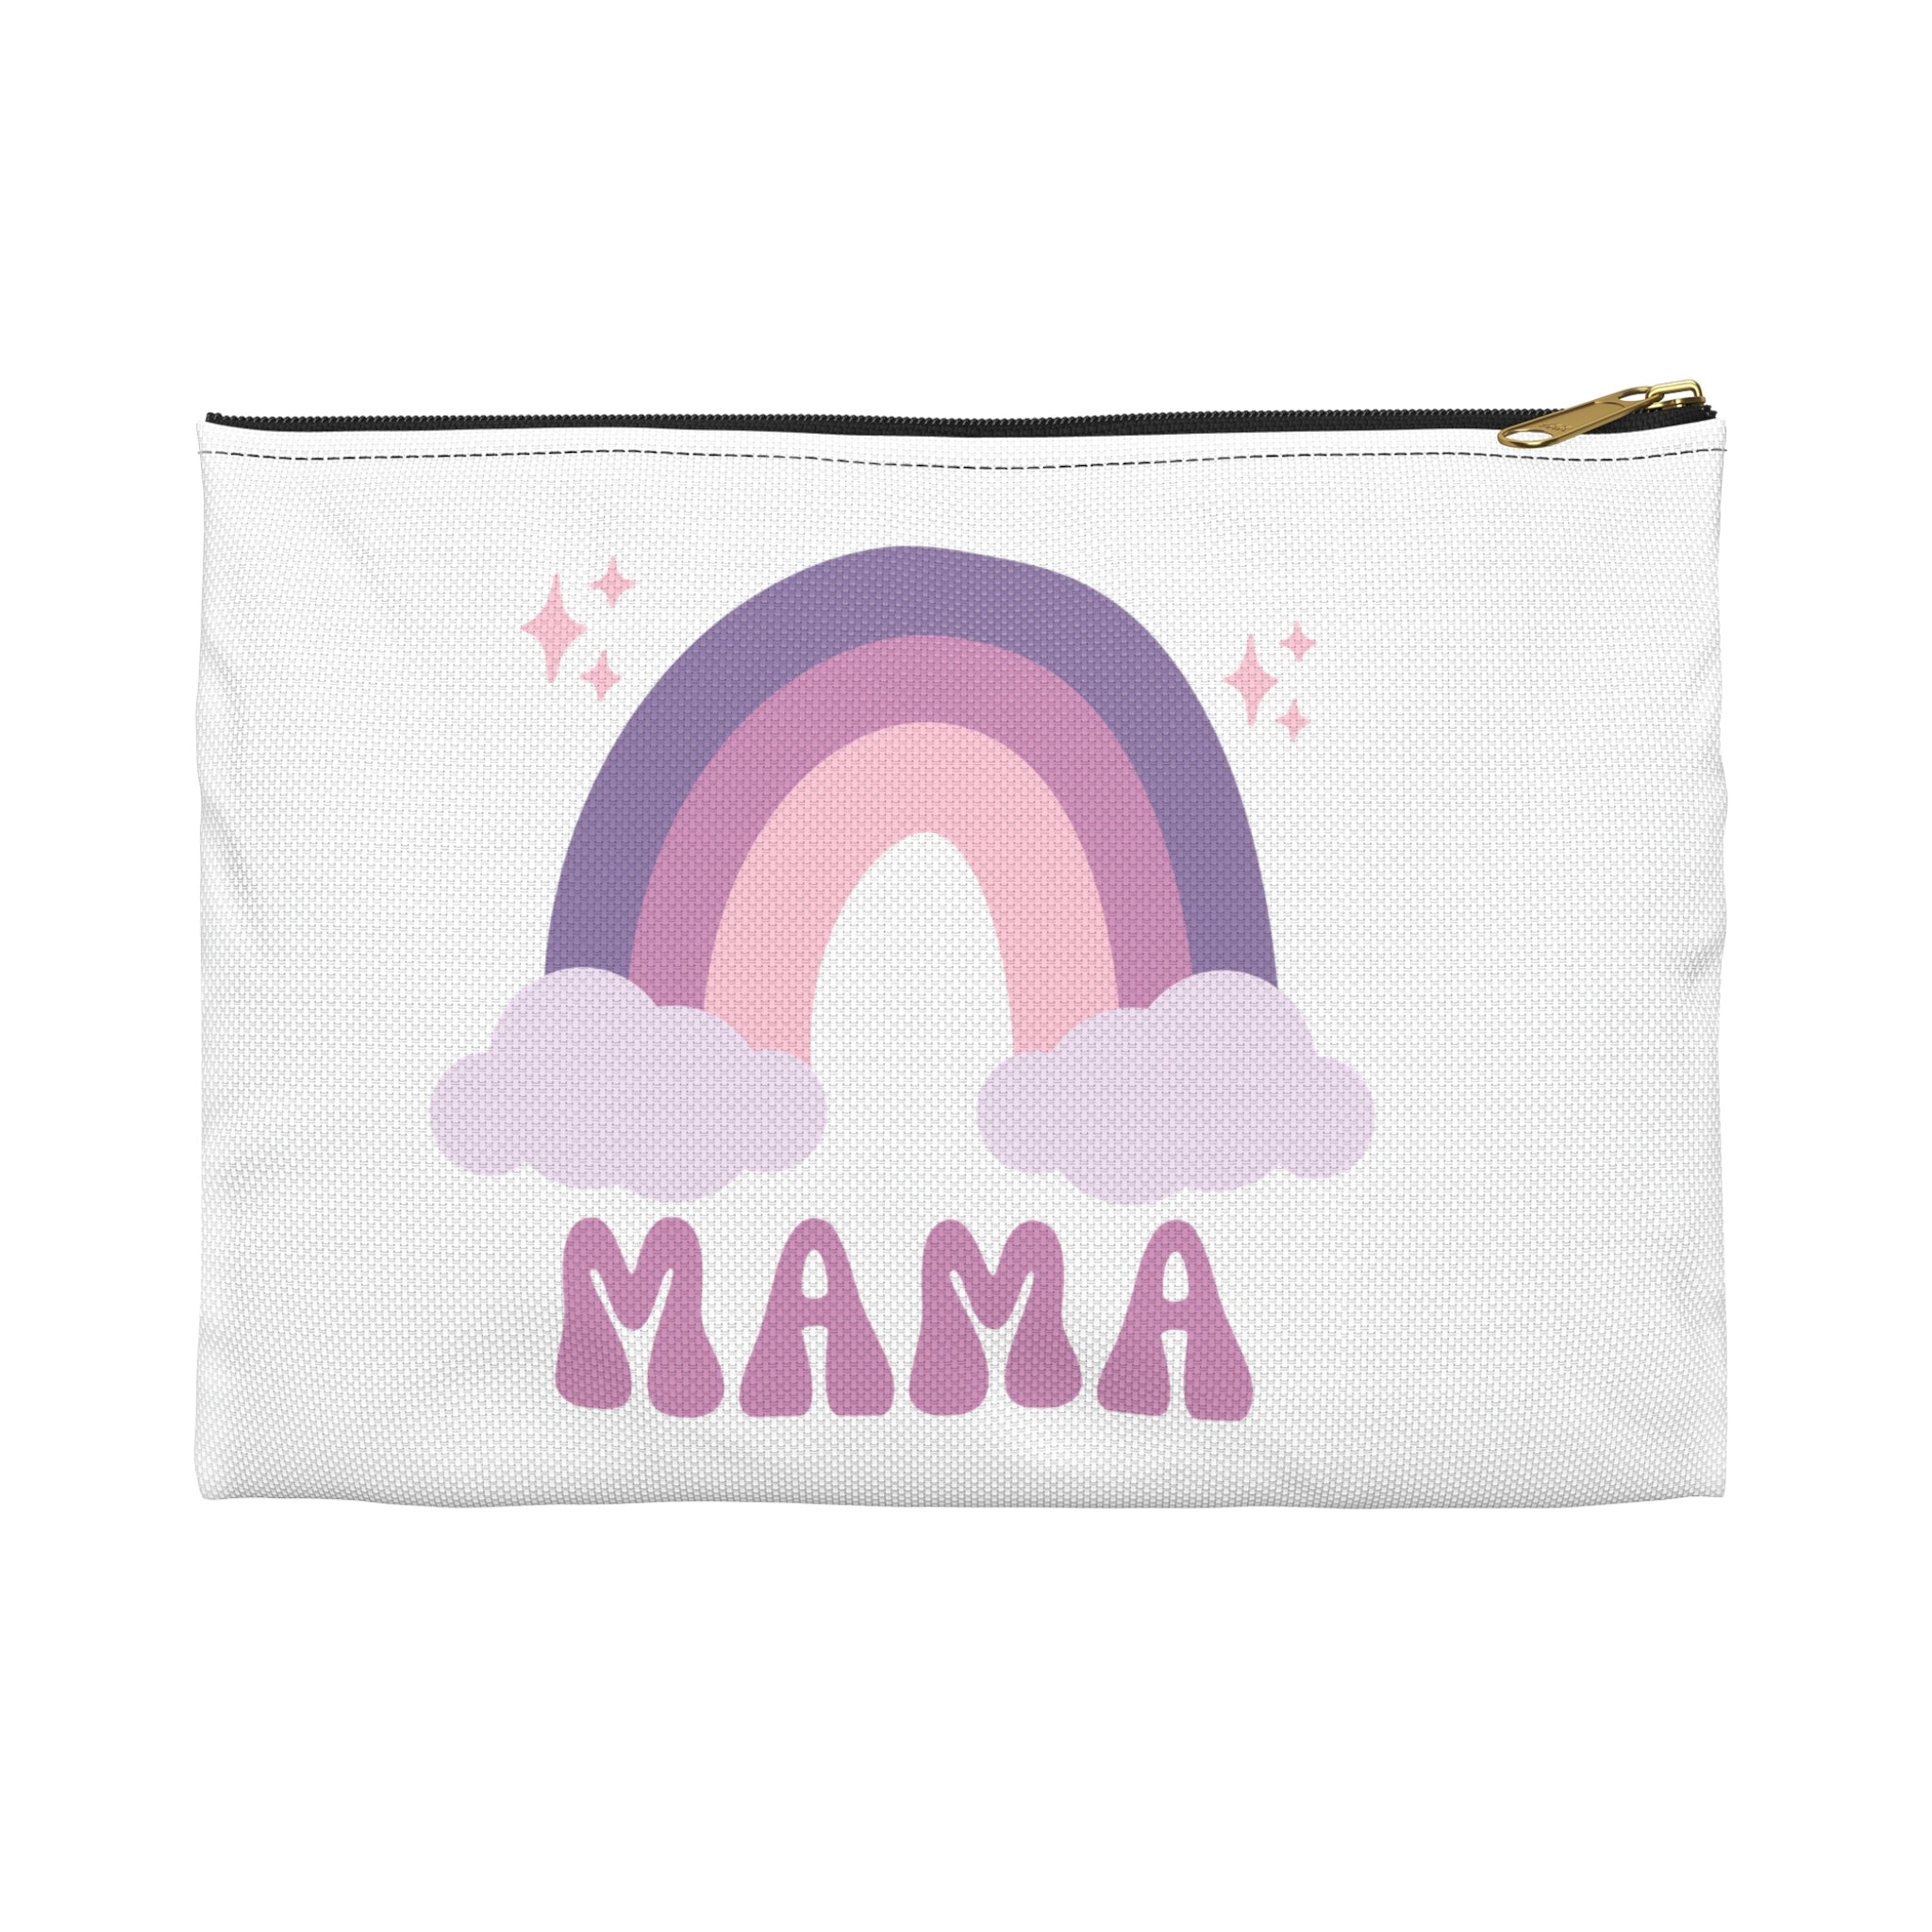 Rainbow Mama Colorful Design Accessory Pouch Bag